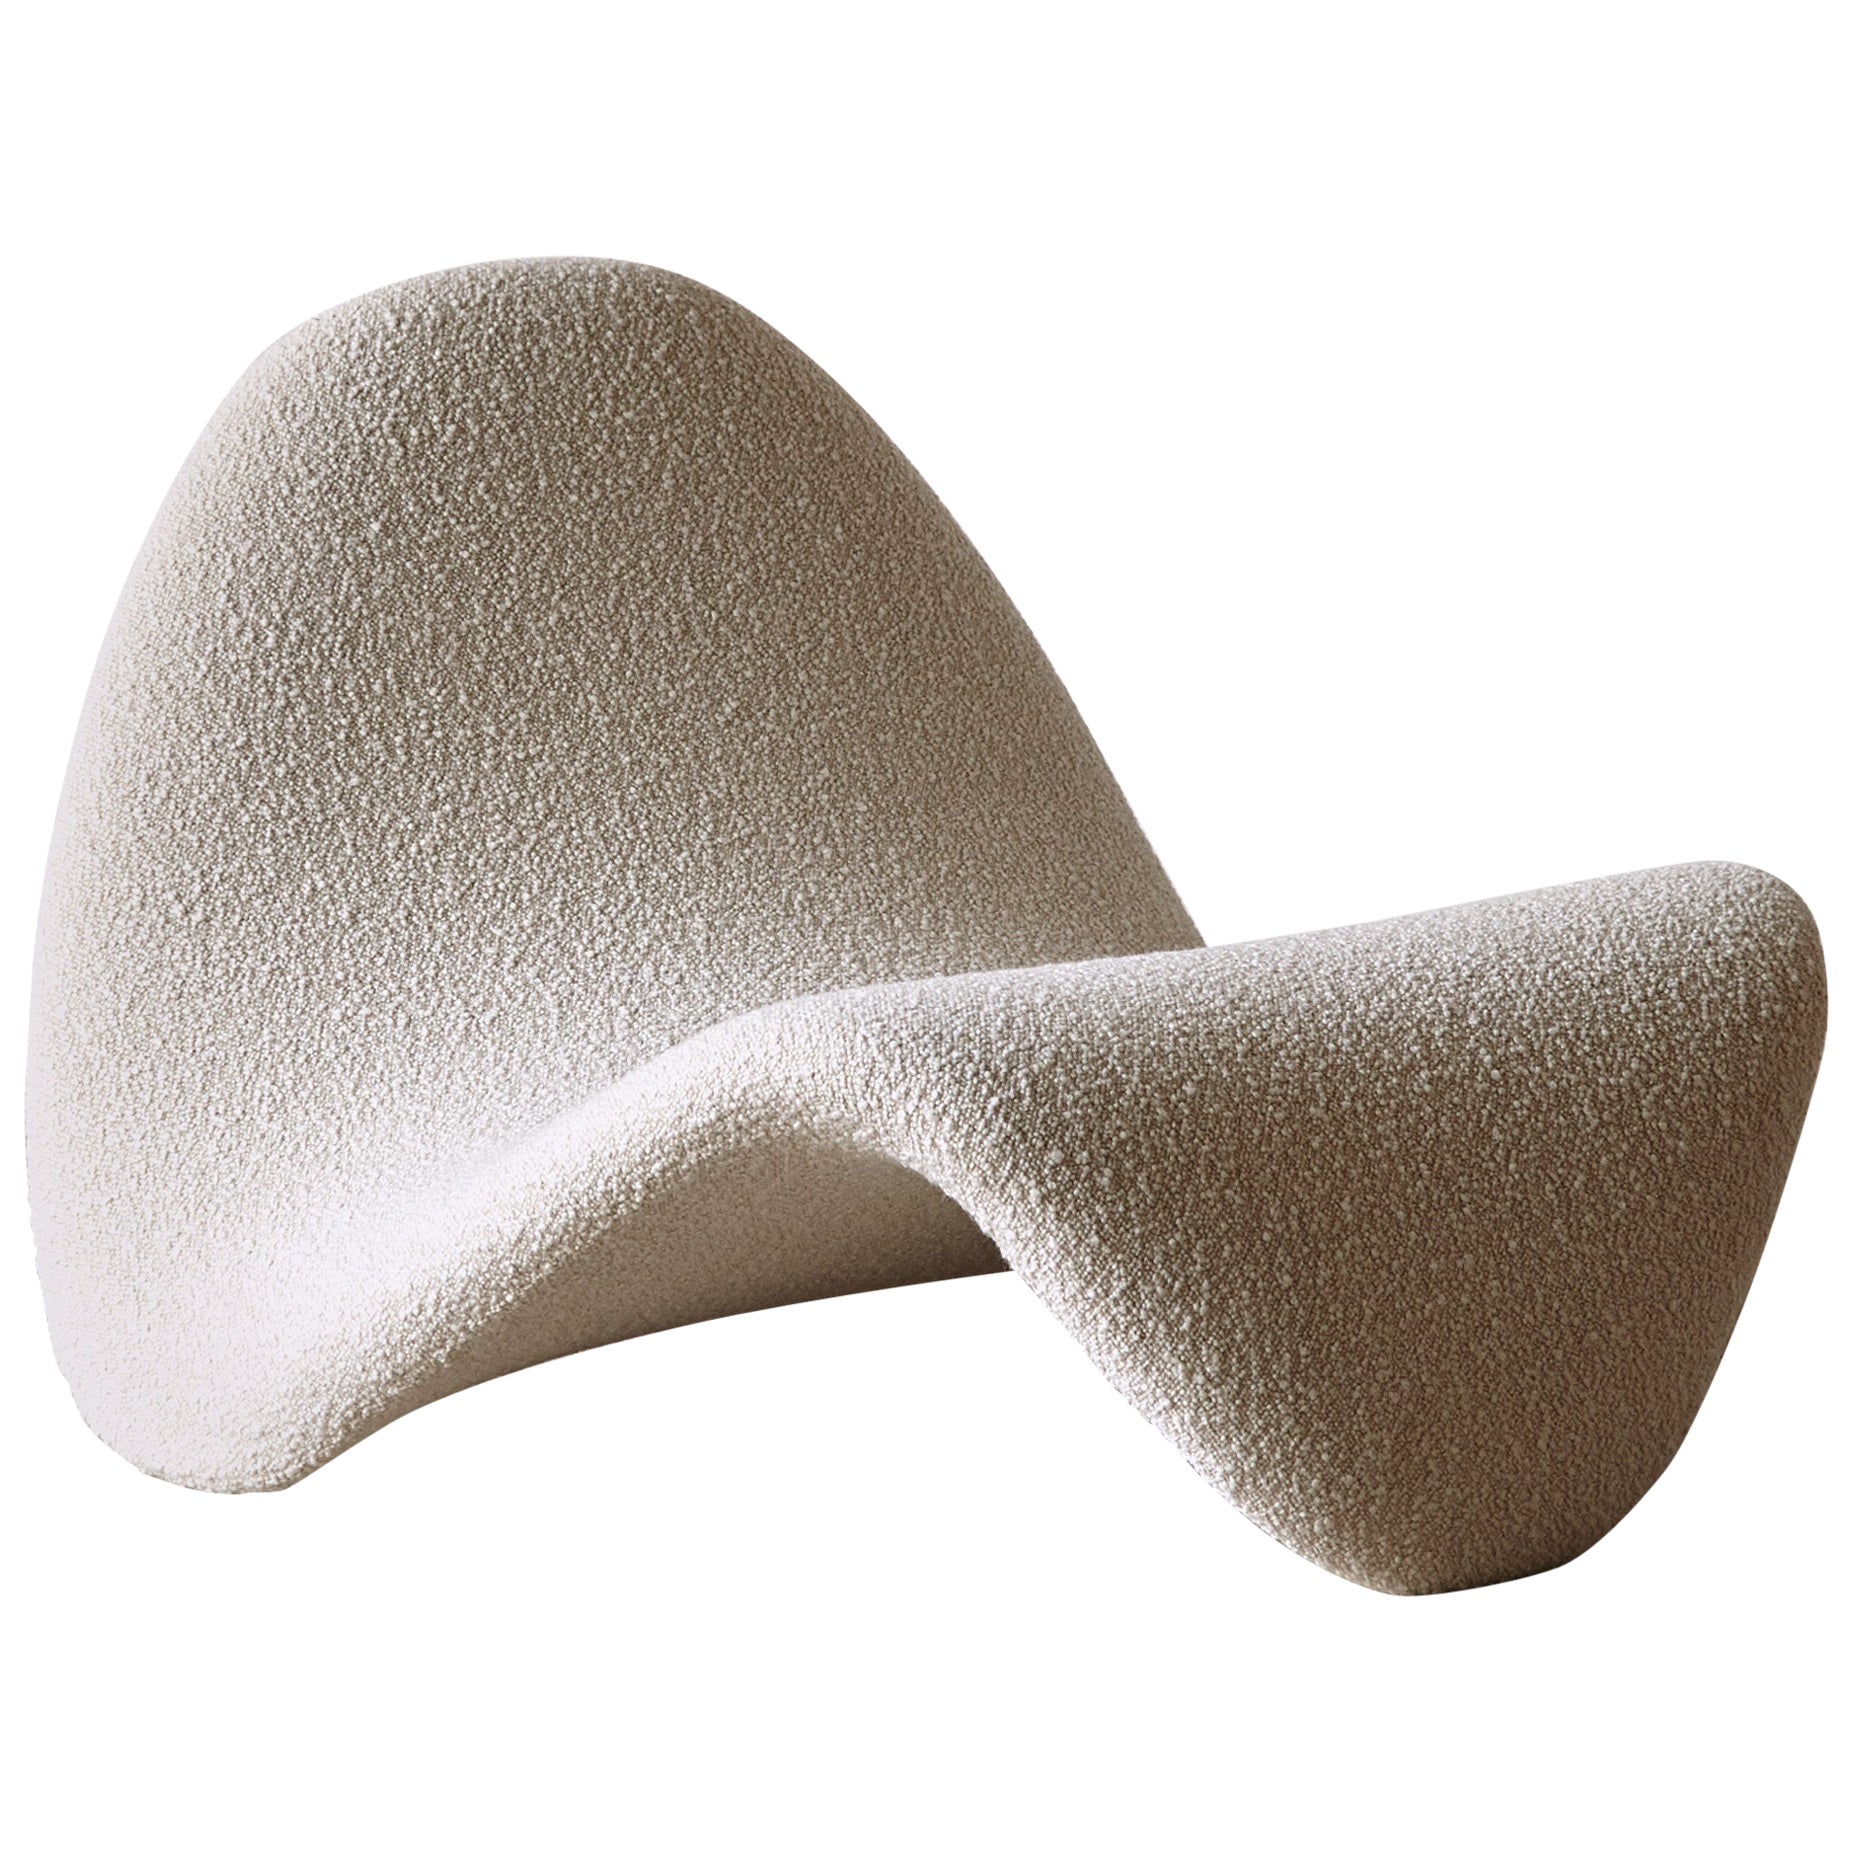 Pierre Paulin First Edition Tongue Chair, 1960s